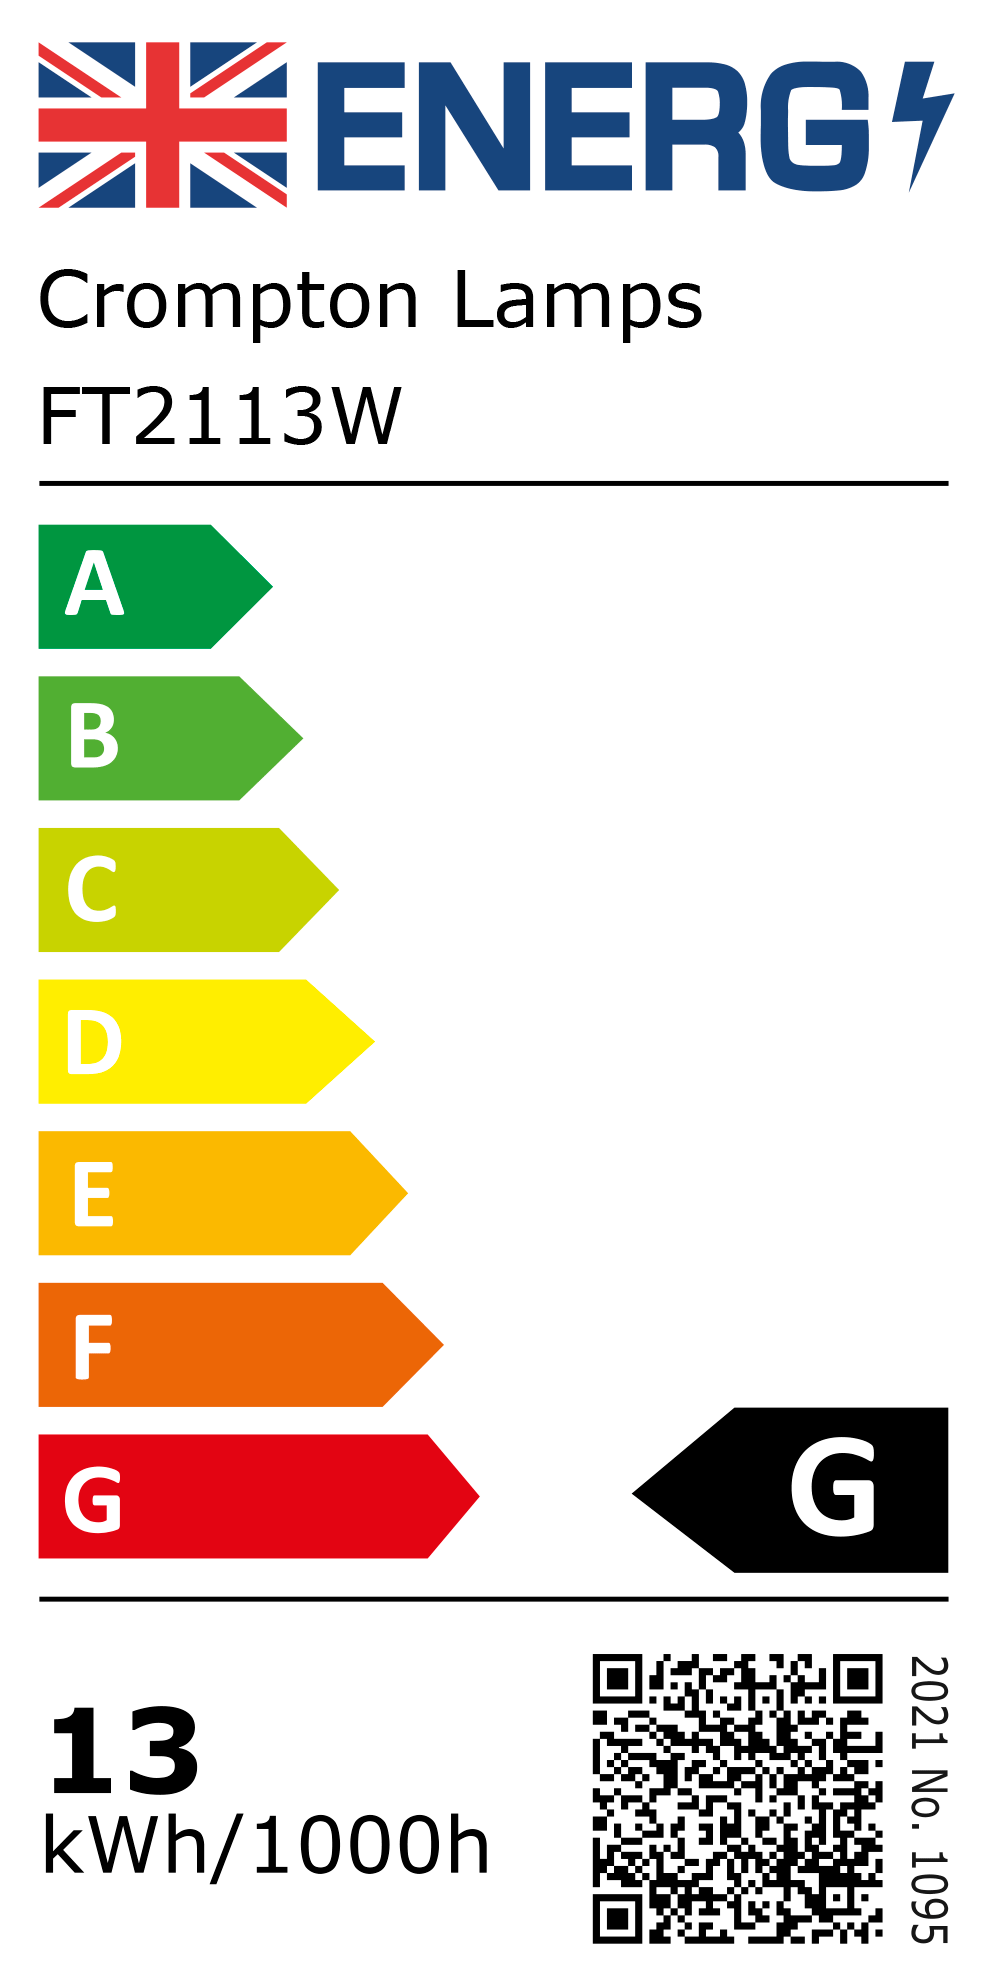 New 2021 Energy Rating Label: Stock Code FT2113W